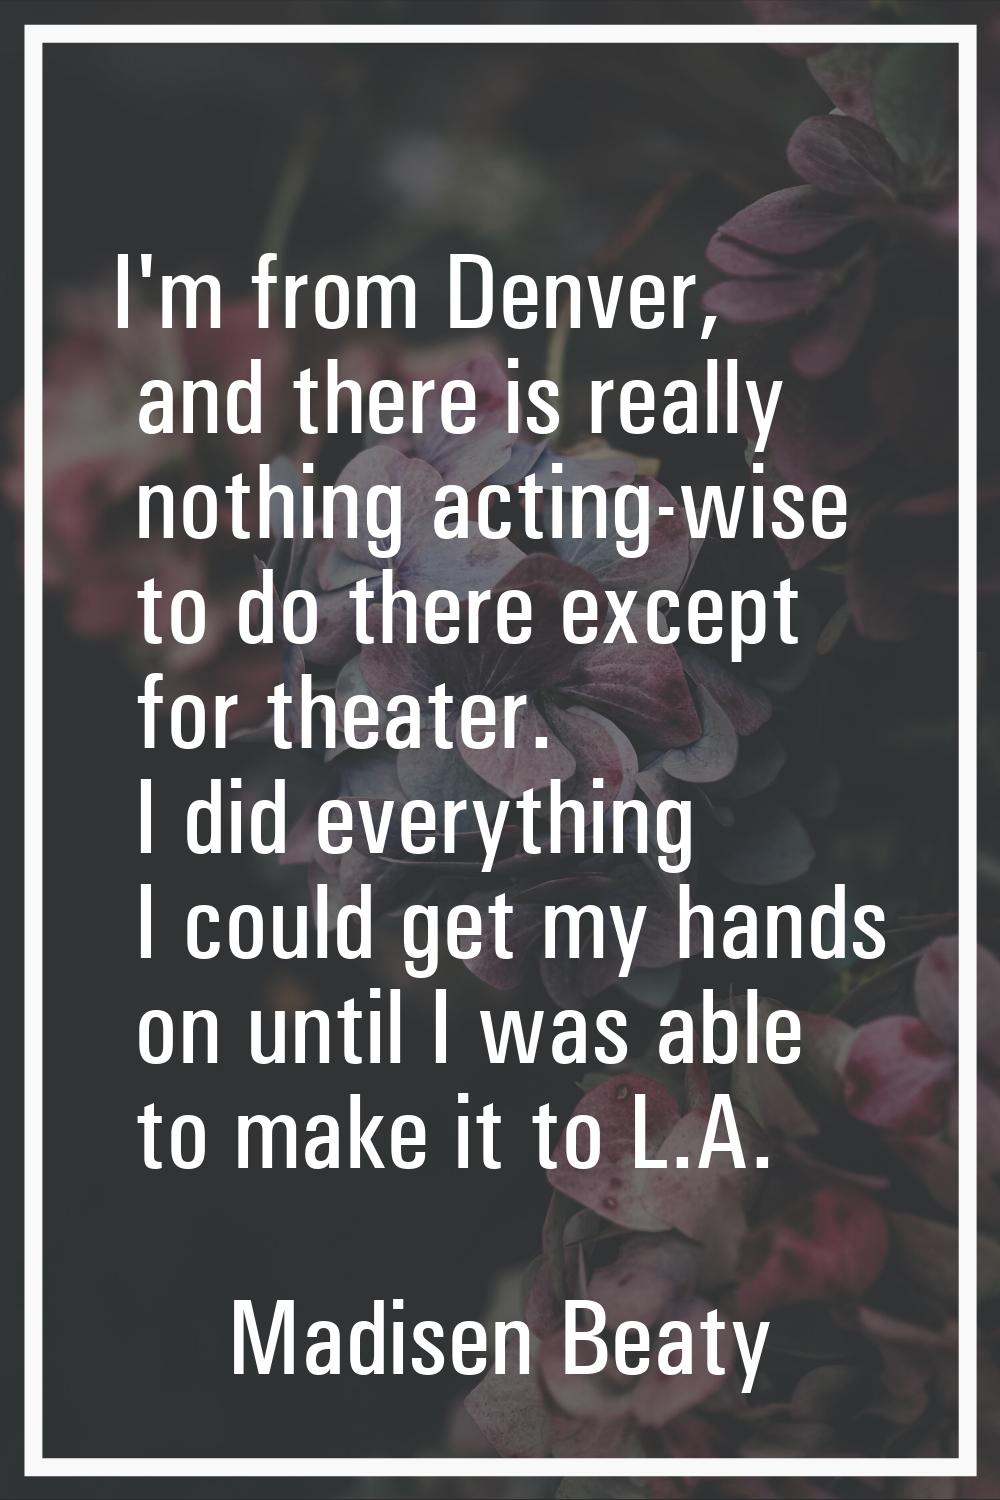 I'm from Denver, and there is really nothing acting-wise to do there except for theater. I did ever